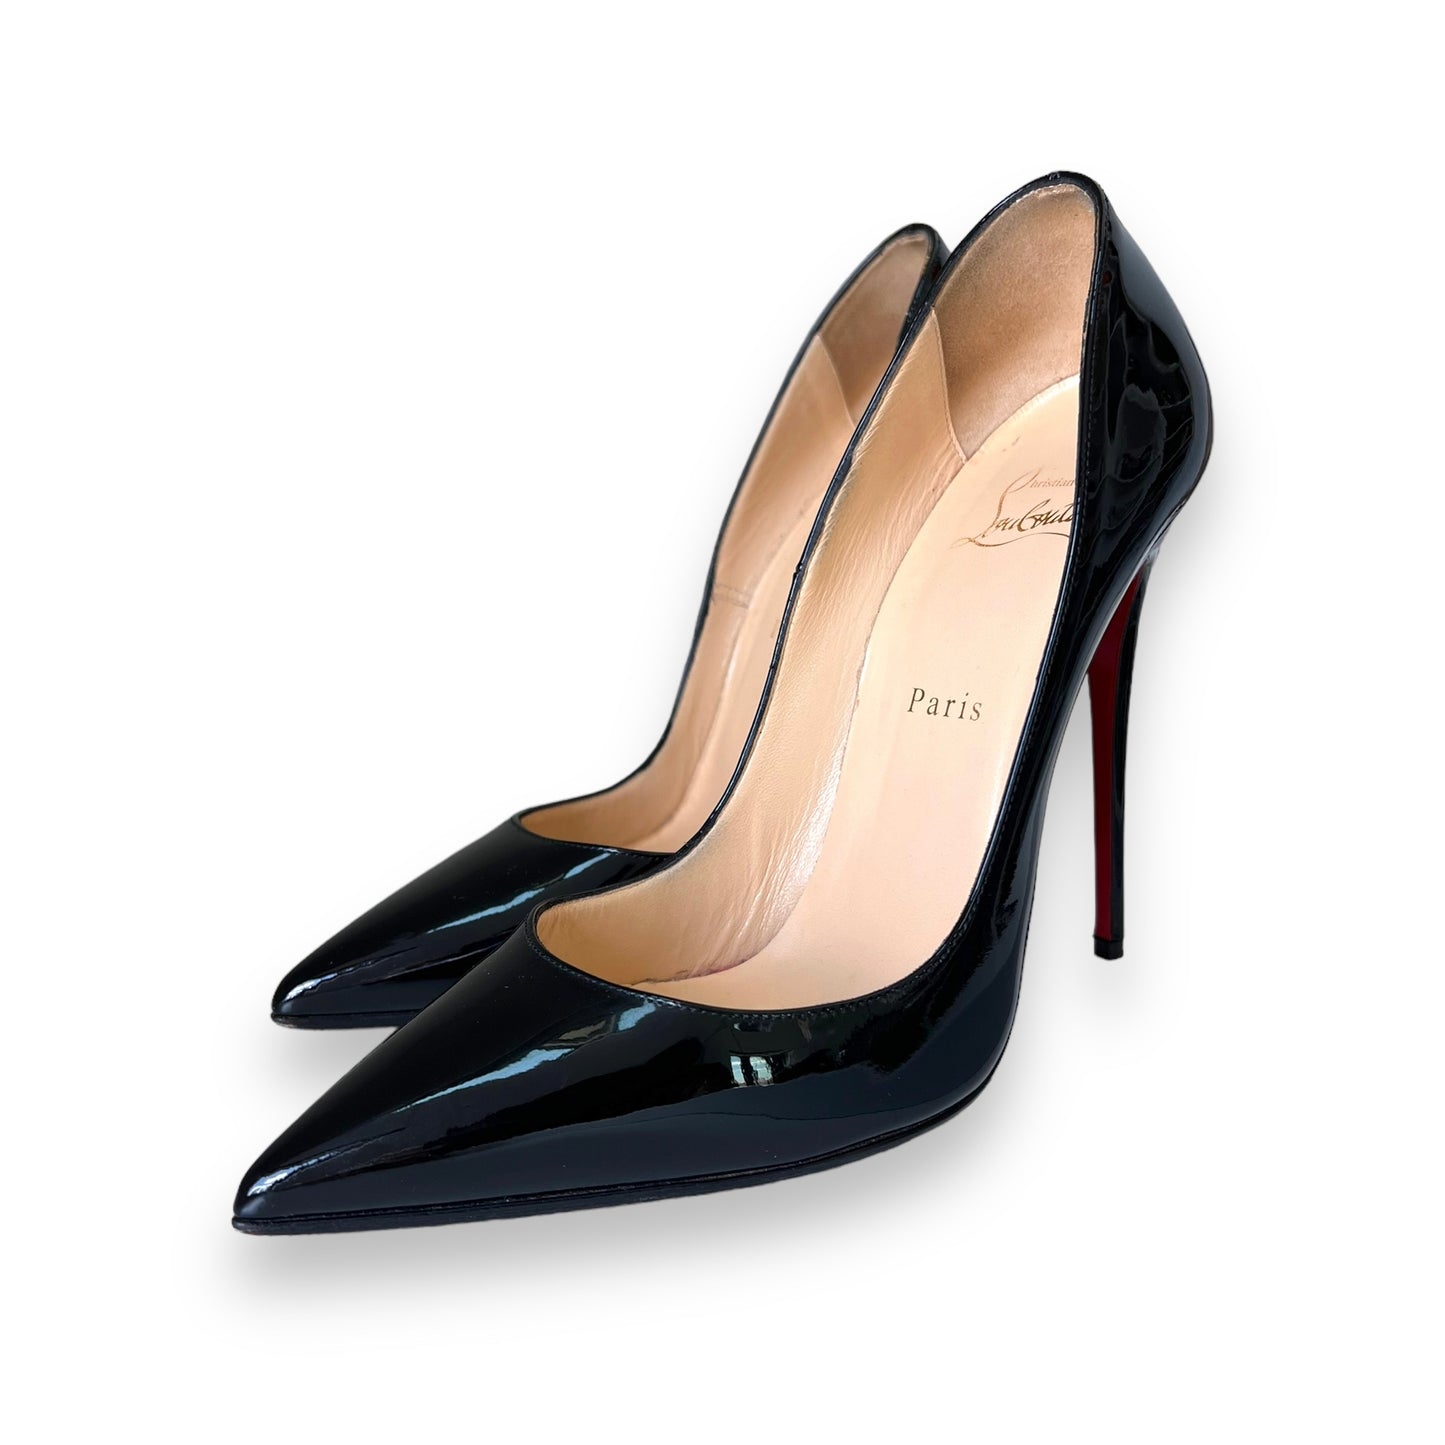 Christian Louboutin So Kate Patent Leather Pumps